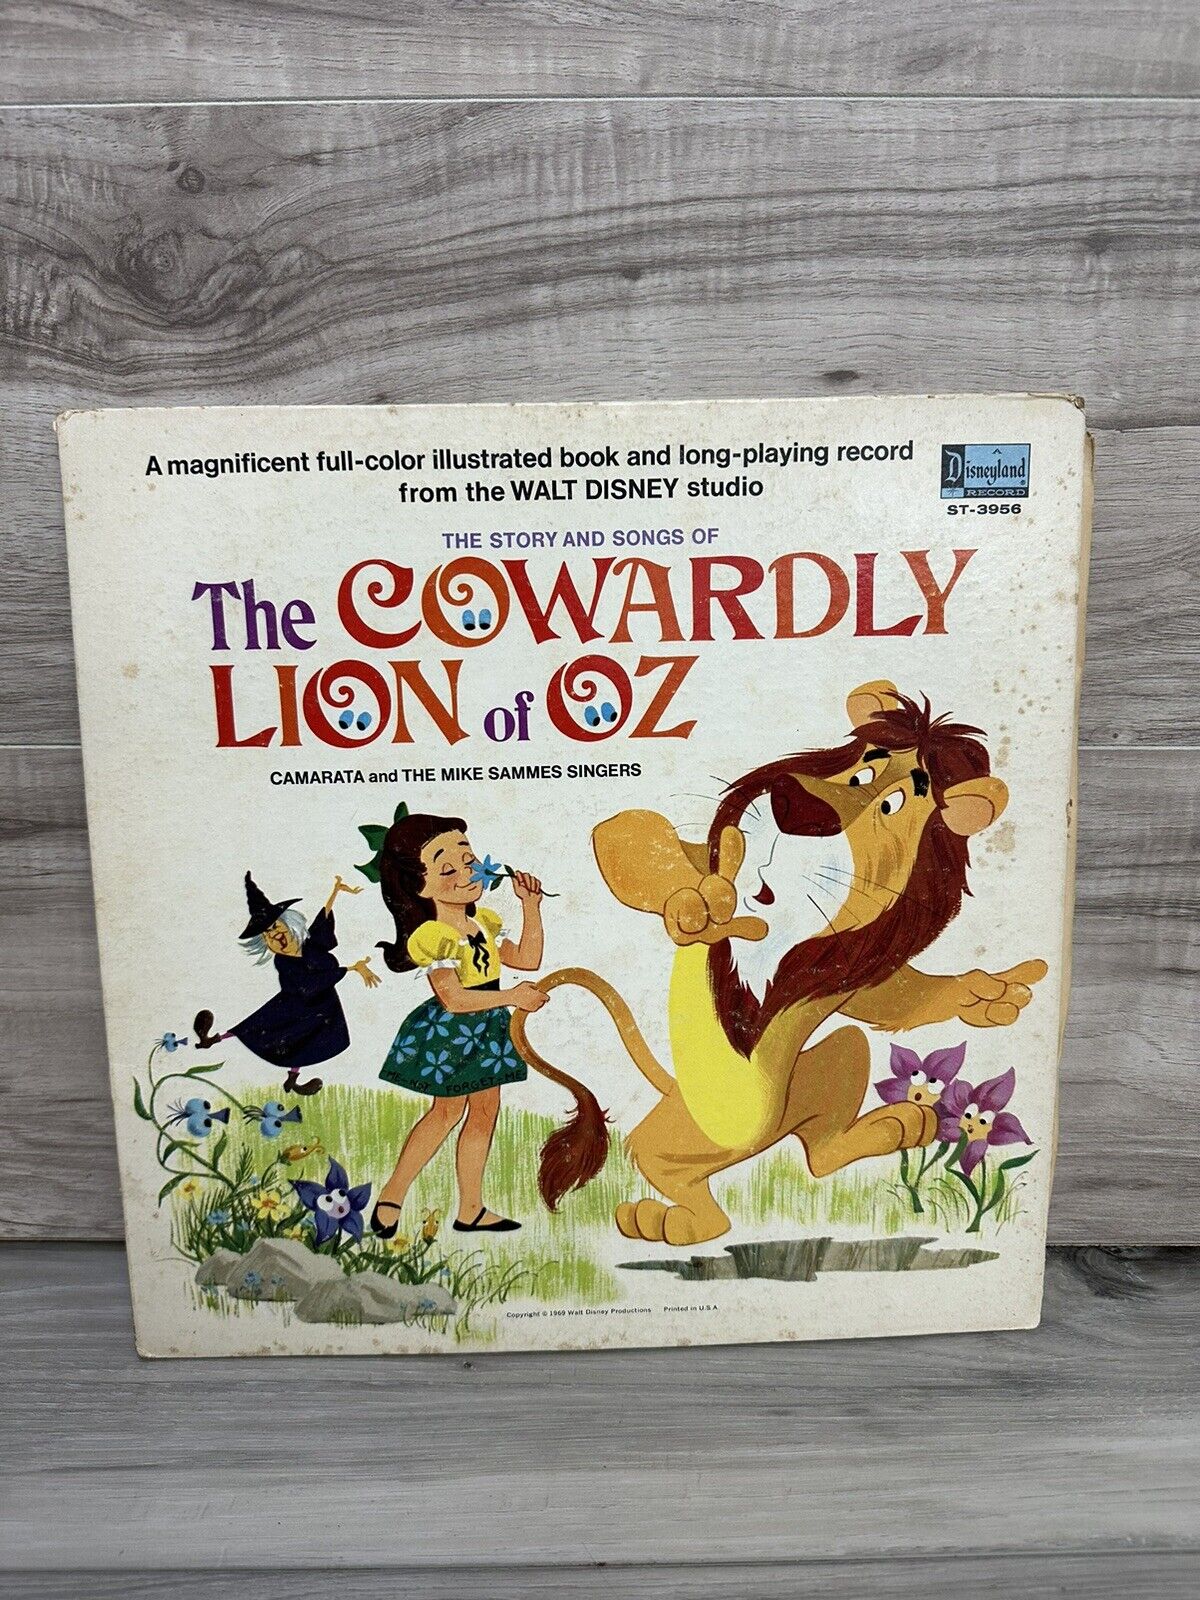 The Story and Songs of the Cowardly Lion of Oz Vinyl Record   St-3956 